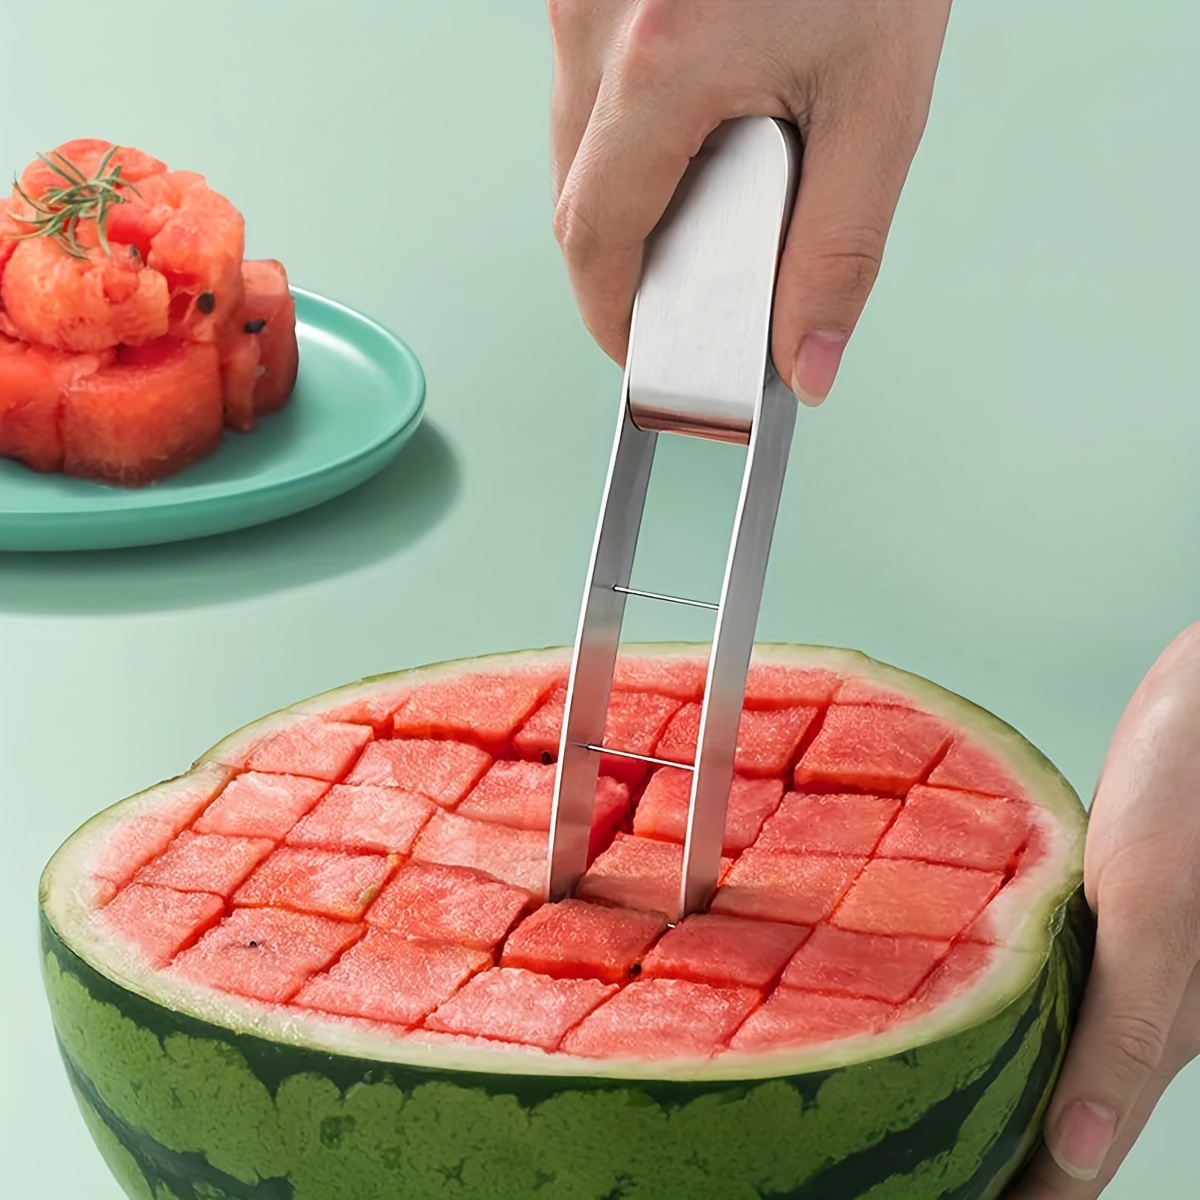 

1pc, Quick And Safe Watermelon Cutter - Stainless Steel Cube Cutter For Fruit Salad And Melon - Kitchen Gadget And Accessory For Easy Slicing And Cutting